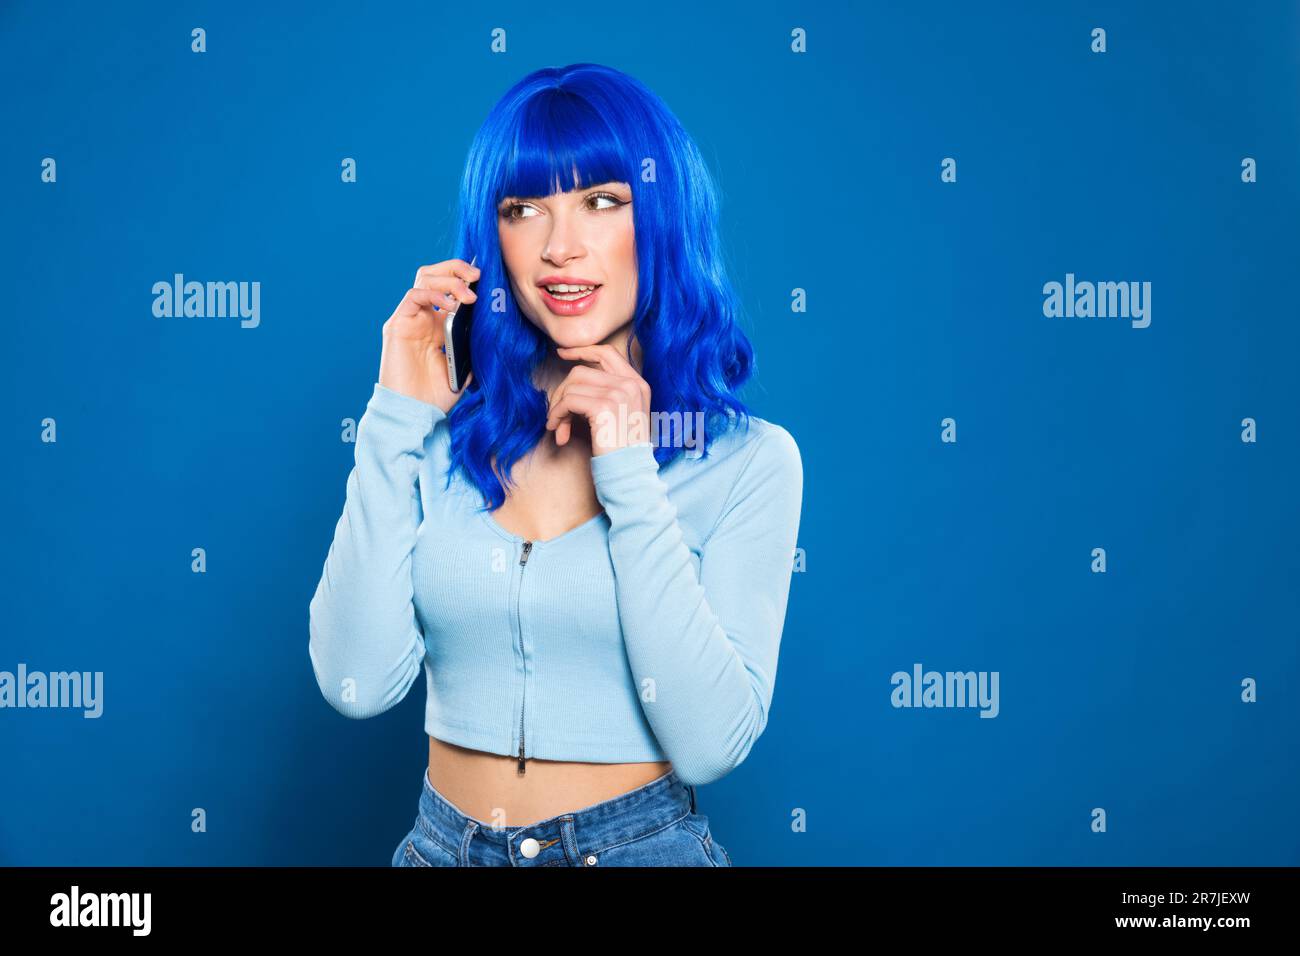 Confident young female model with bright dyed hair in casual clothes smiling and looking away while talking on smartphone against blue background Stock Photo